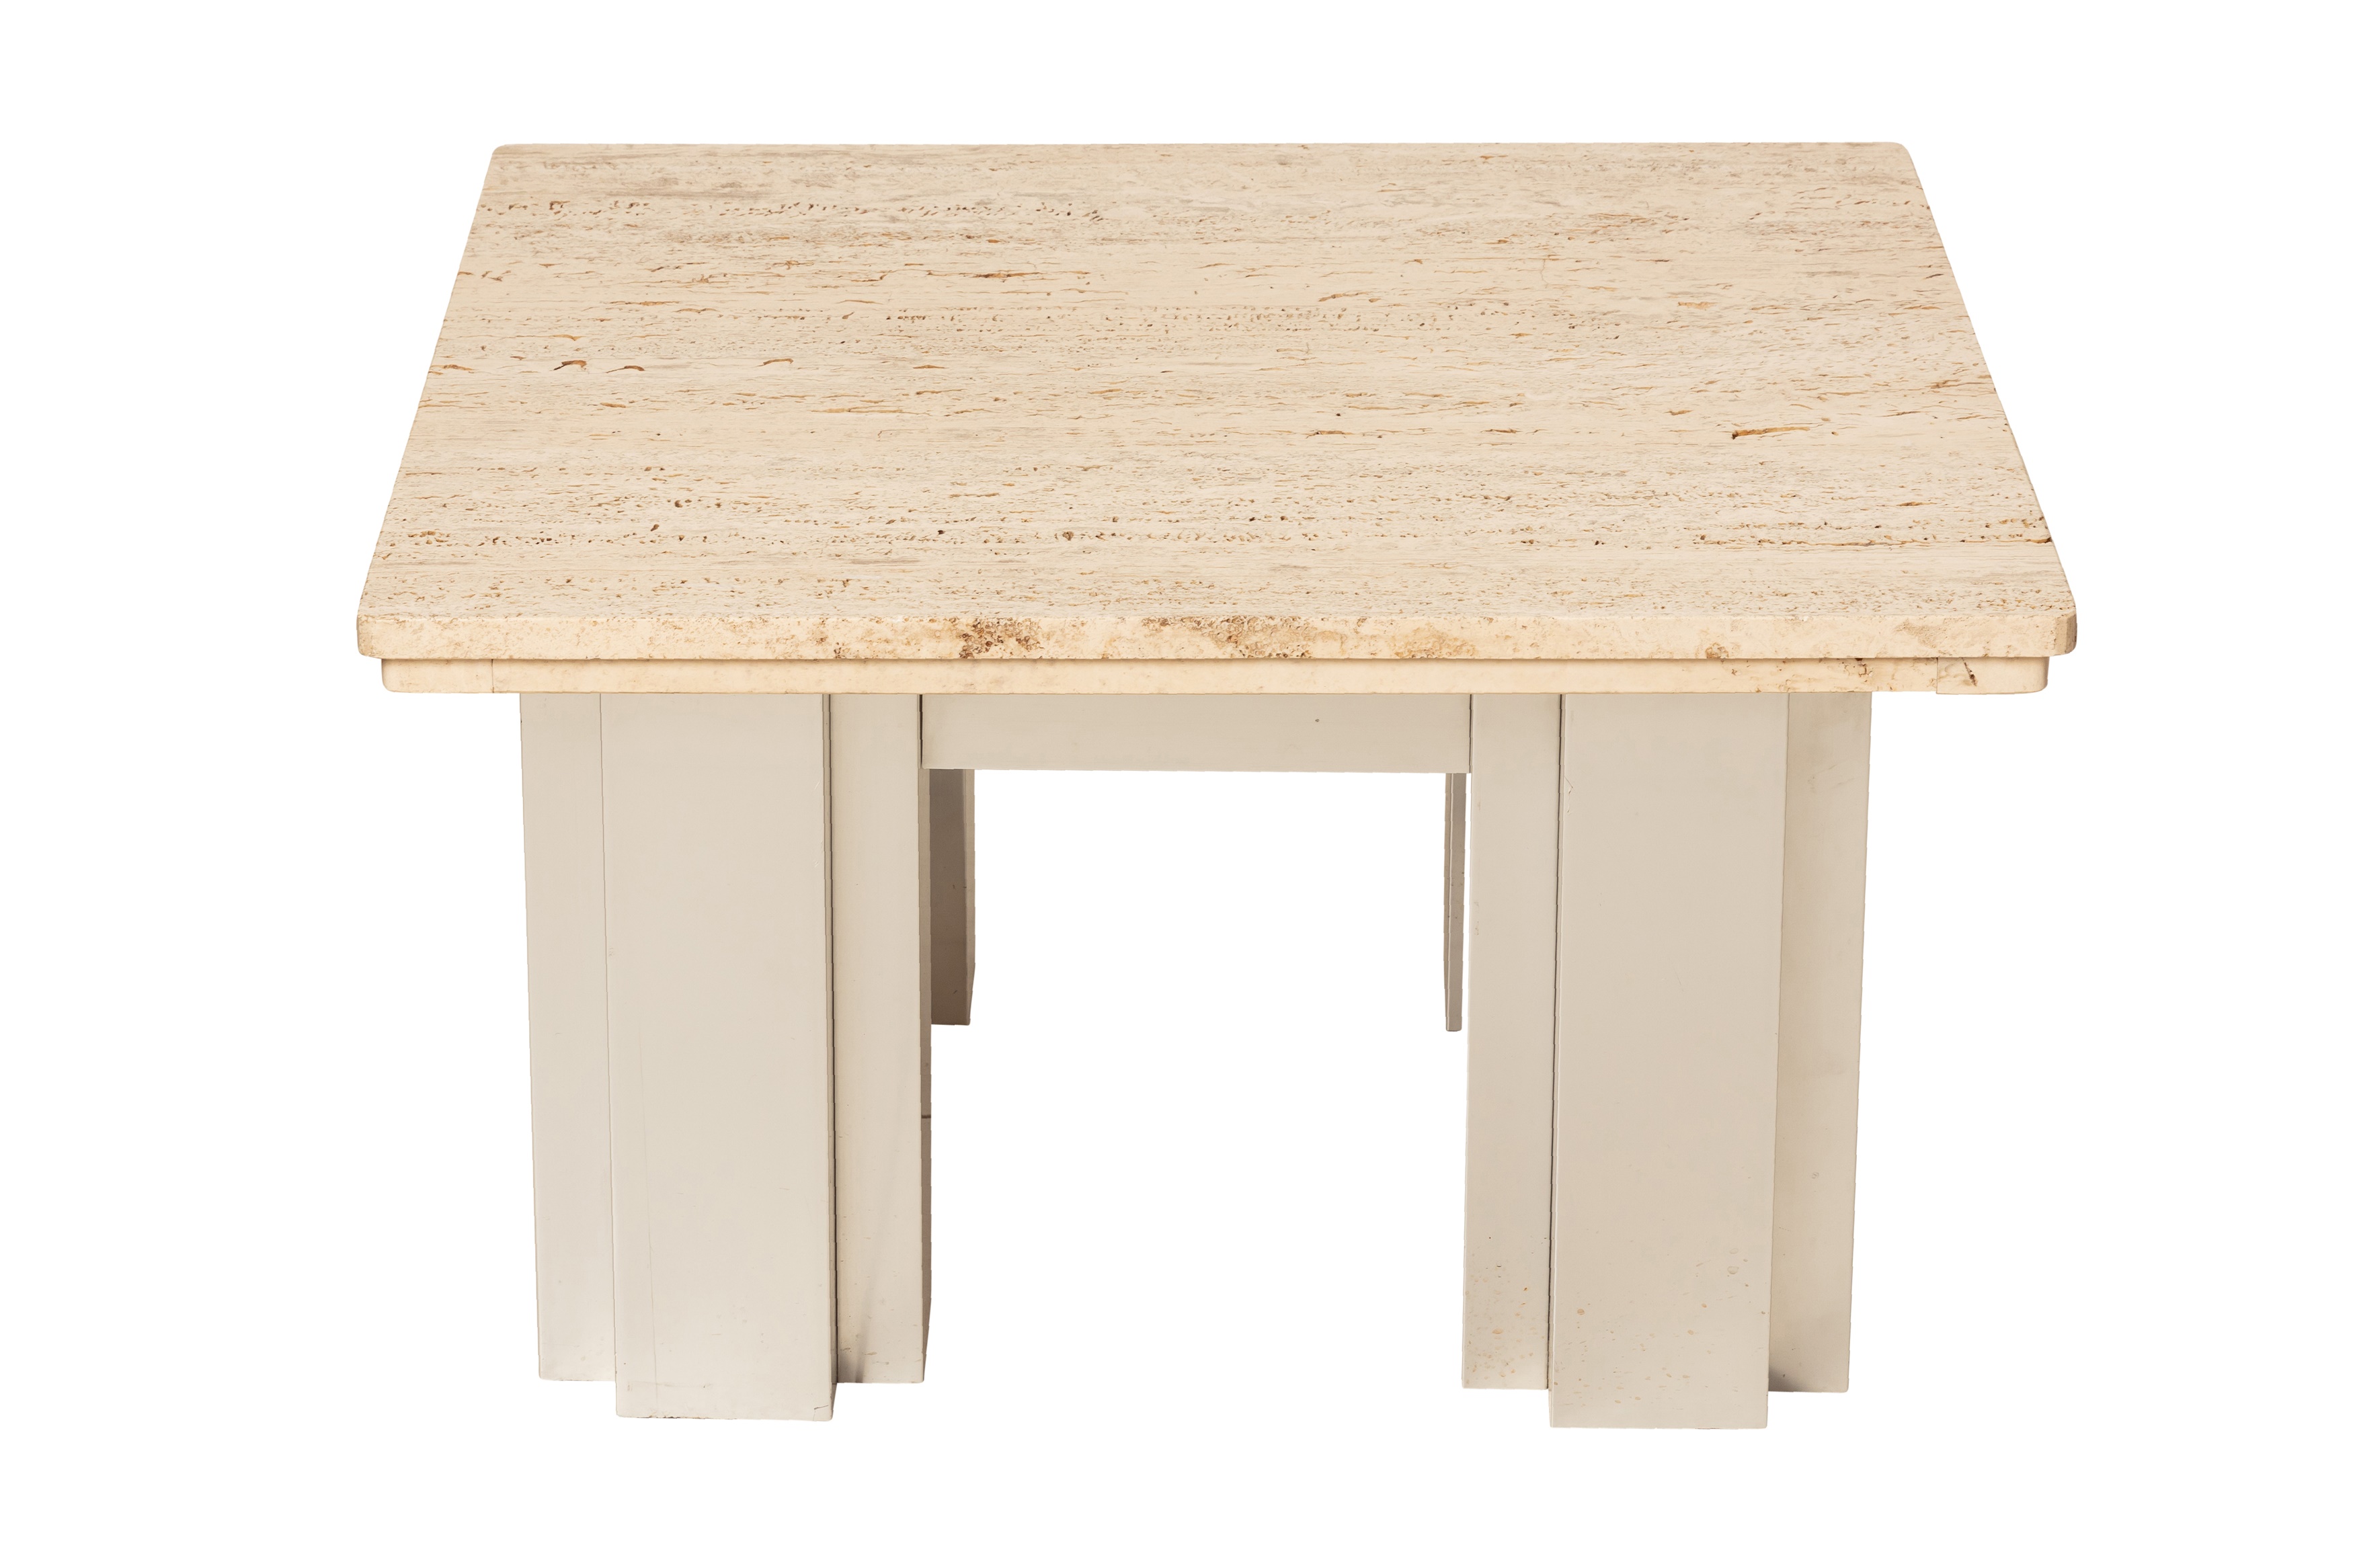 A TRAVERTINE COFFEE TABLE Preview: Barley Mow Centre - Image 2 of 2